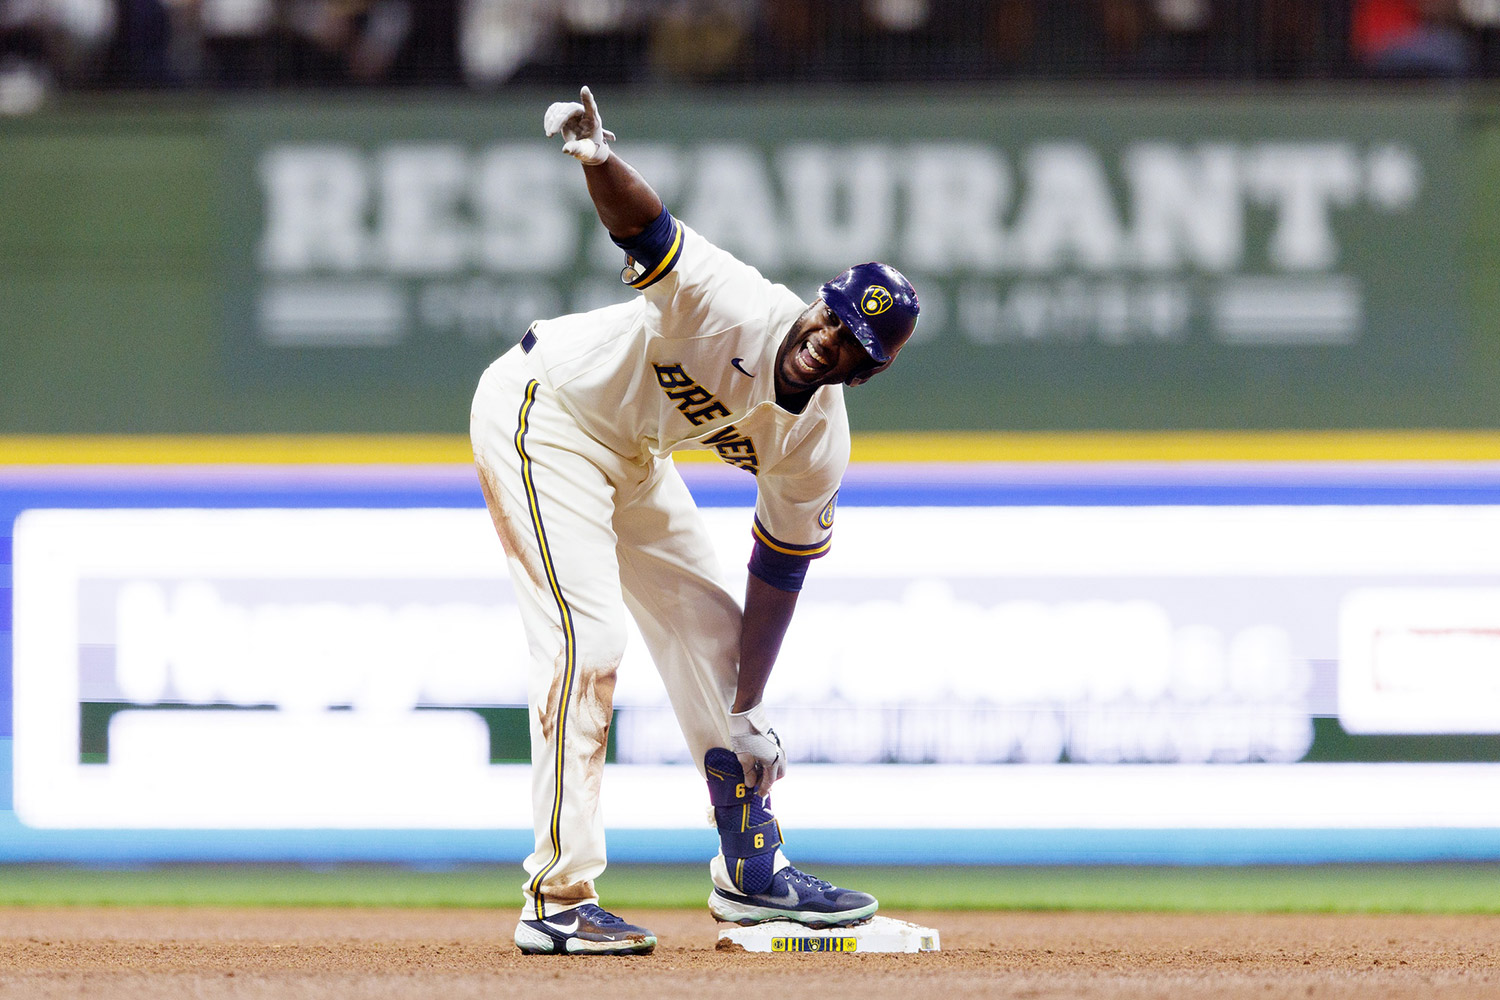 Brewer Fanatic 2022 Awards: Most Valuable Player - Brewers